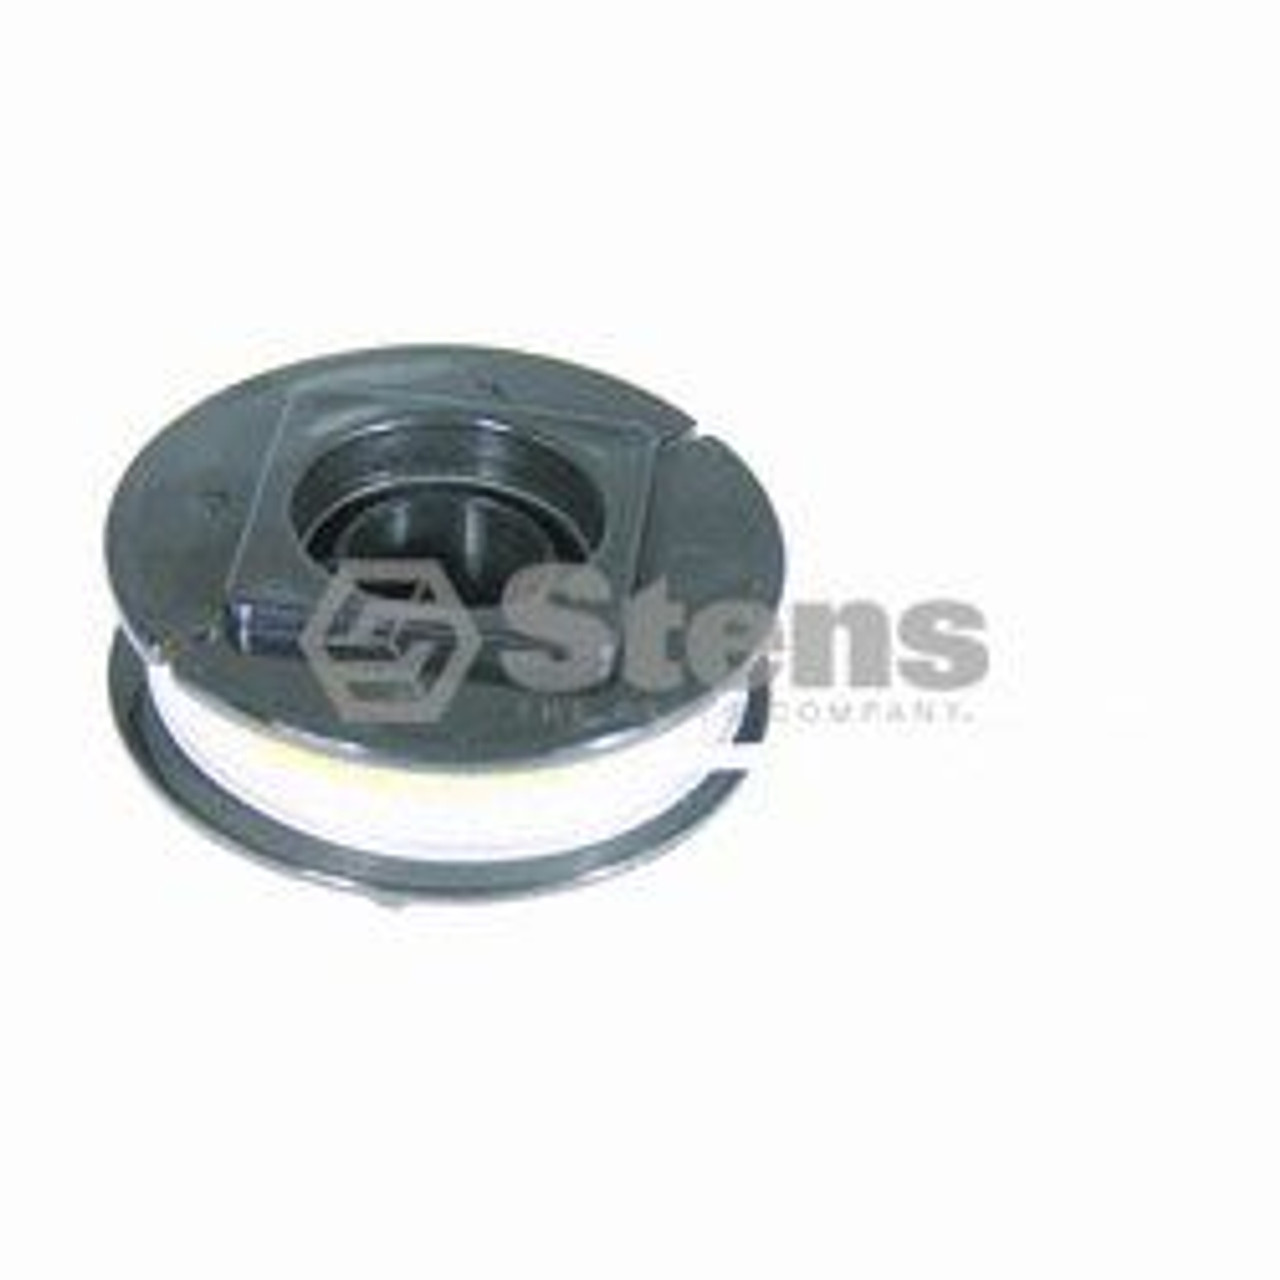 Trimmer Head Spool With Line